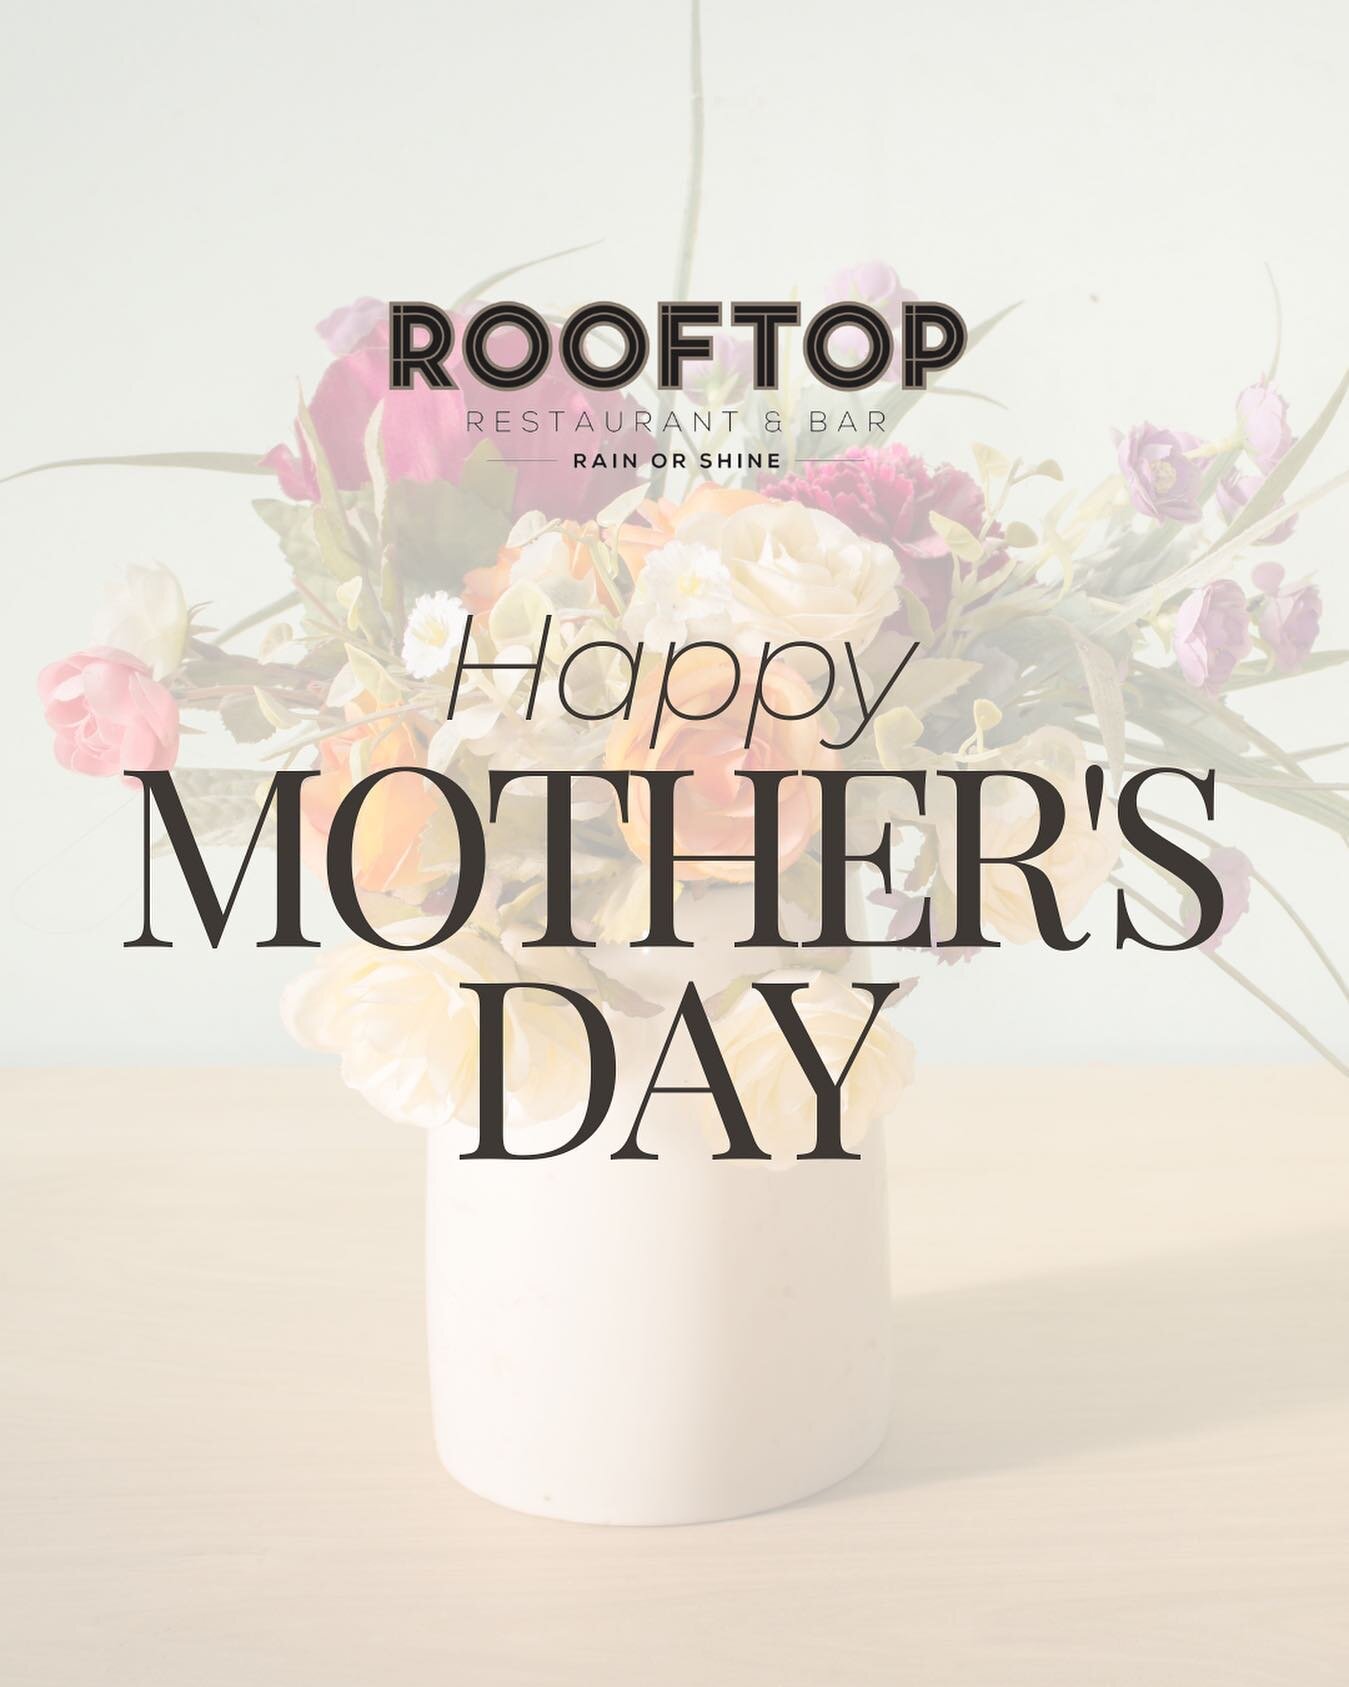 Happy Mother&rsquo;s Day. 💐 We look forward to seeing you for lunch &amp; dinner today.🥂 #RooftopWC

#EnjoyWalnutCreek #EatWalnutCreek #ShopWalnutCreek #WalnutCreek #WalnutCreekCA #Downtownwalnutcreek #walnutcreekmoms #walnutcreektogether #supportw